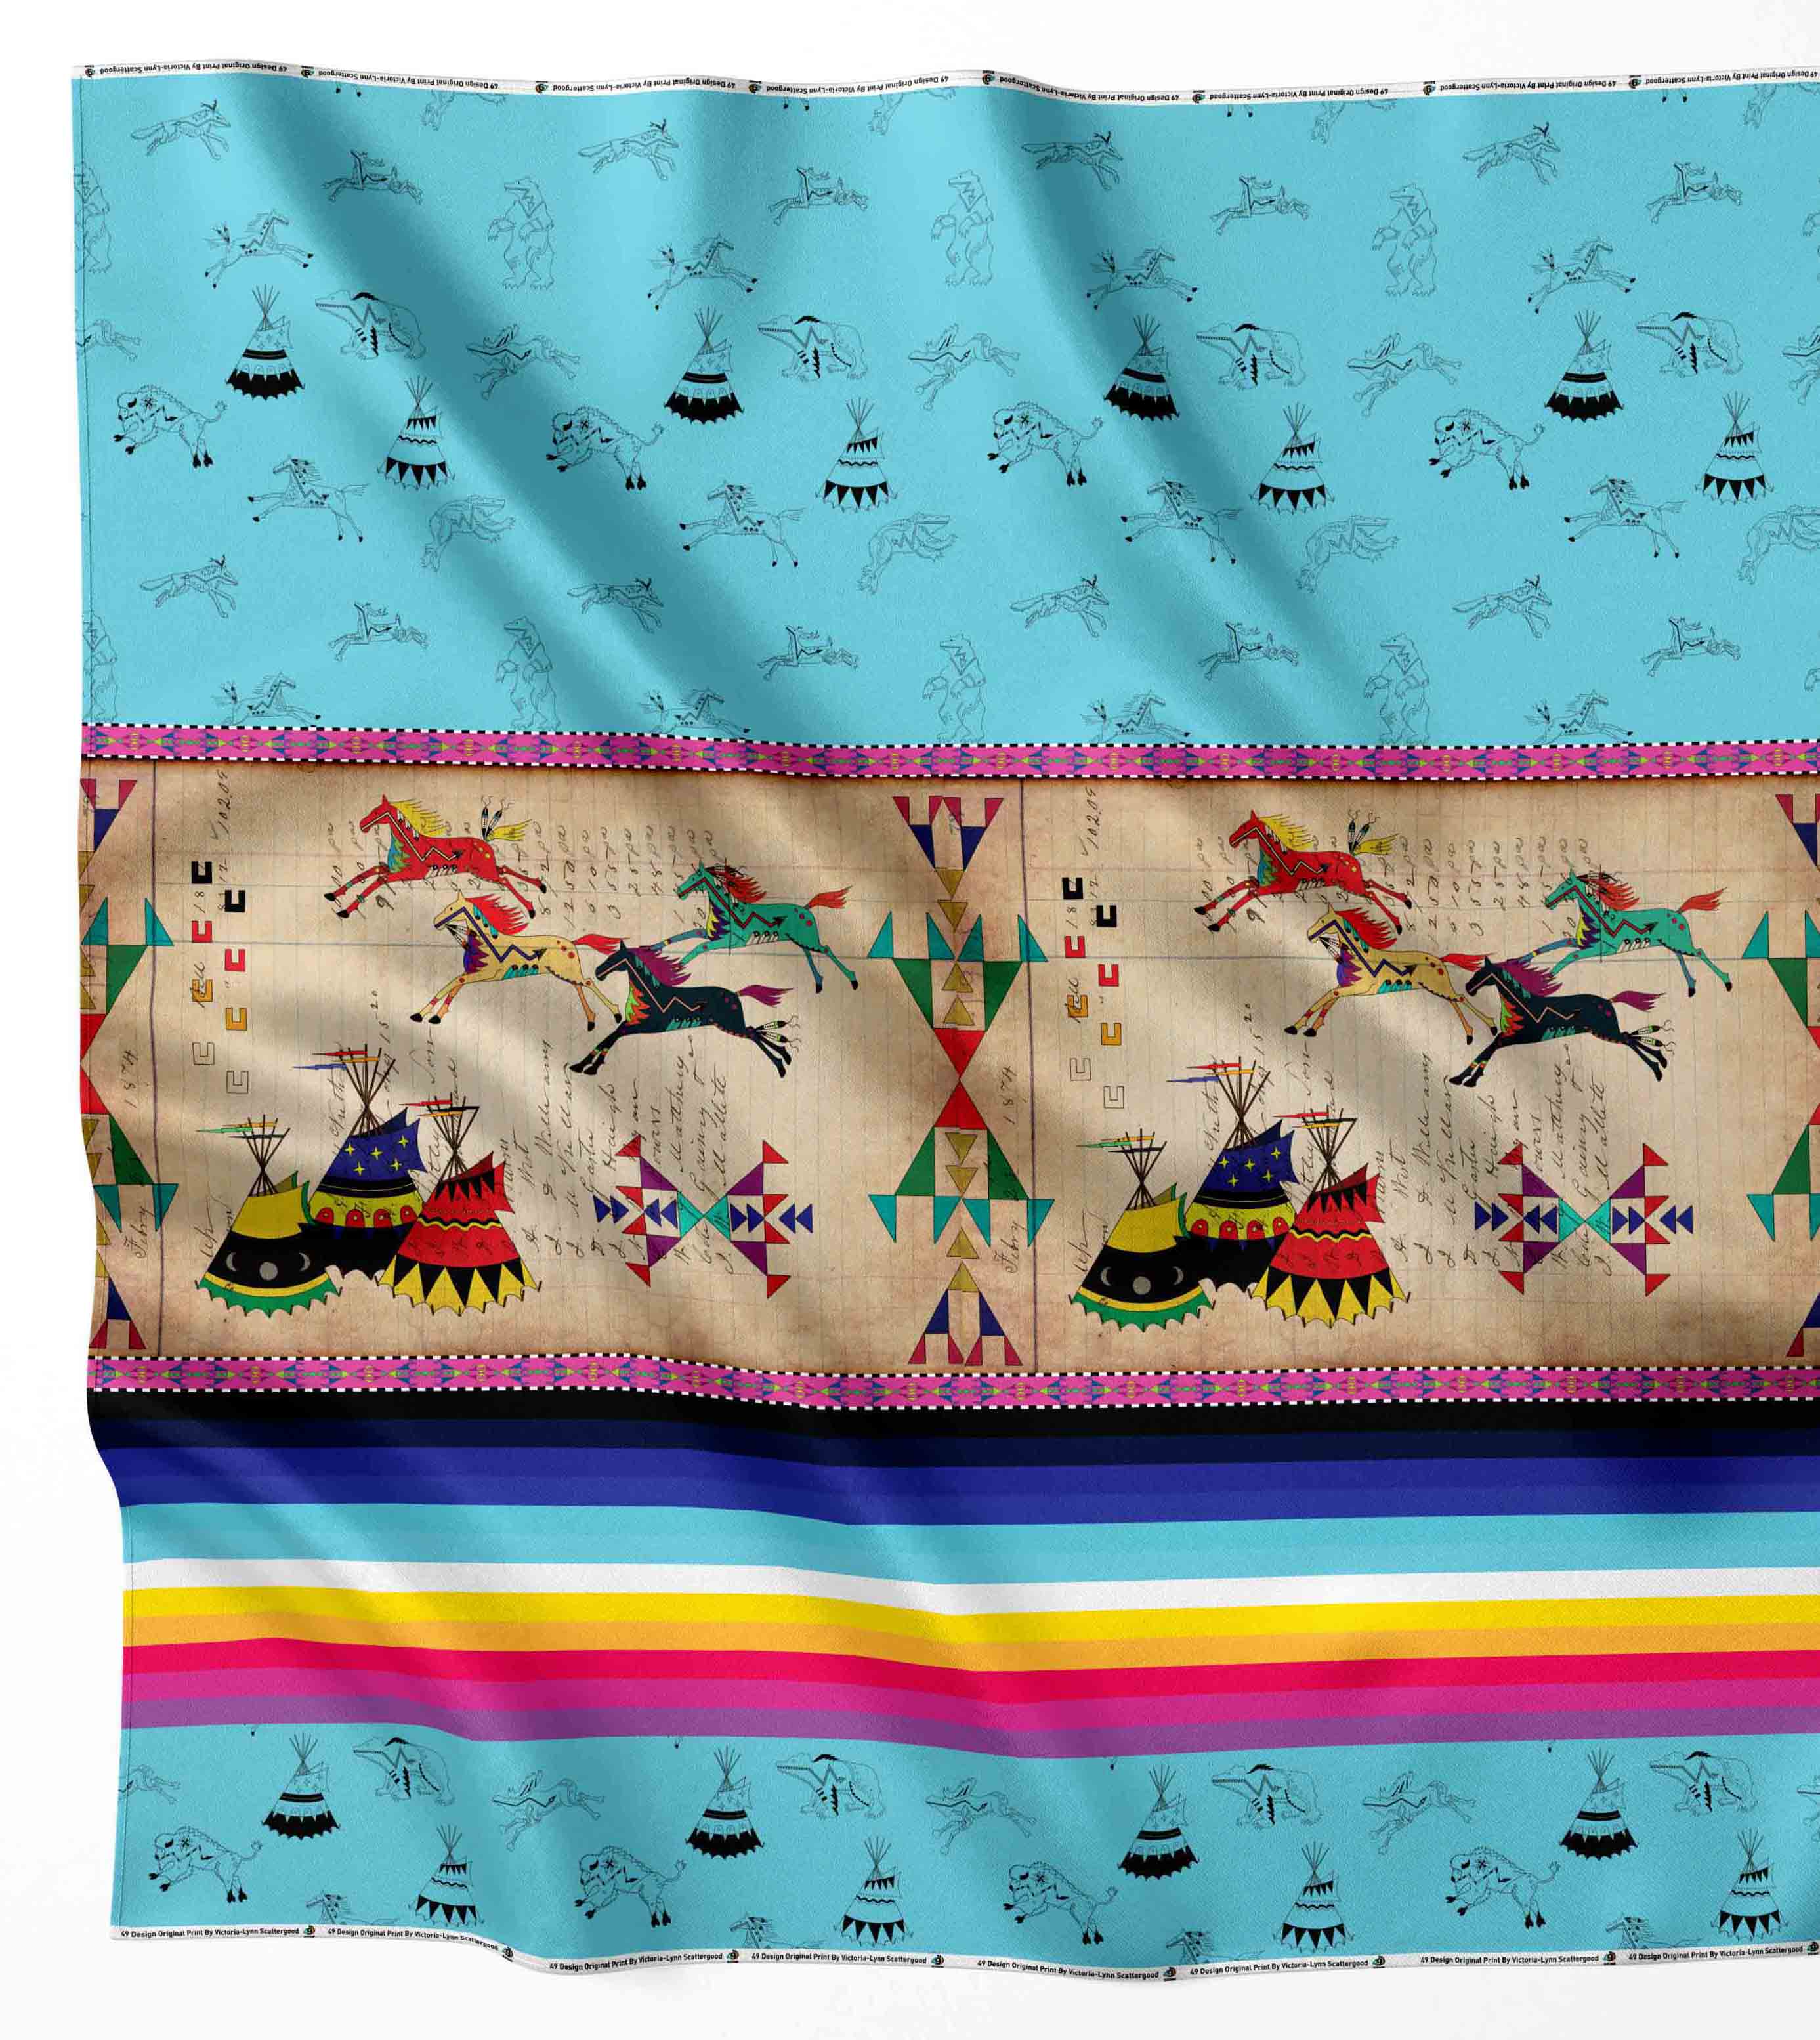 Ledger Horses Running Sky Satin Fabric By the Yard Pre Order